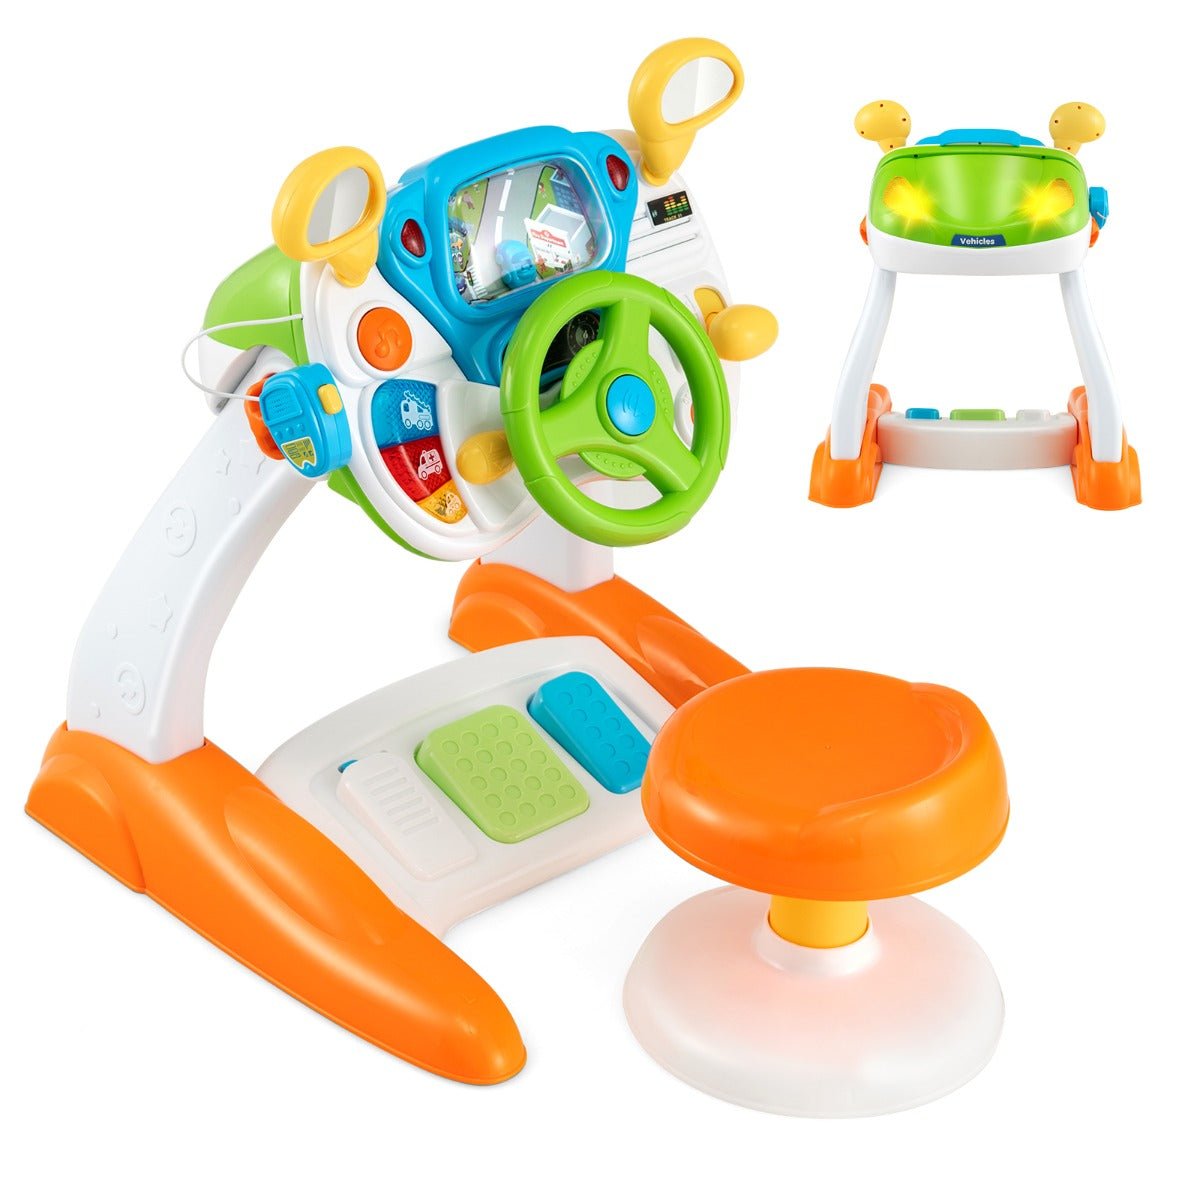 Playful Kids Steering Wheel Toy Set - Lights & Sounds for Simulated Driving